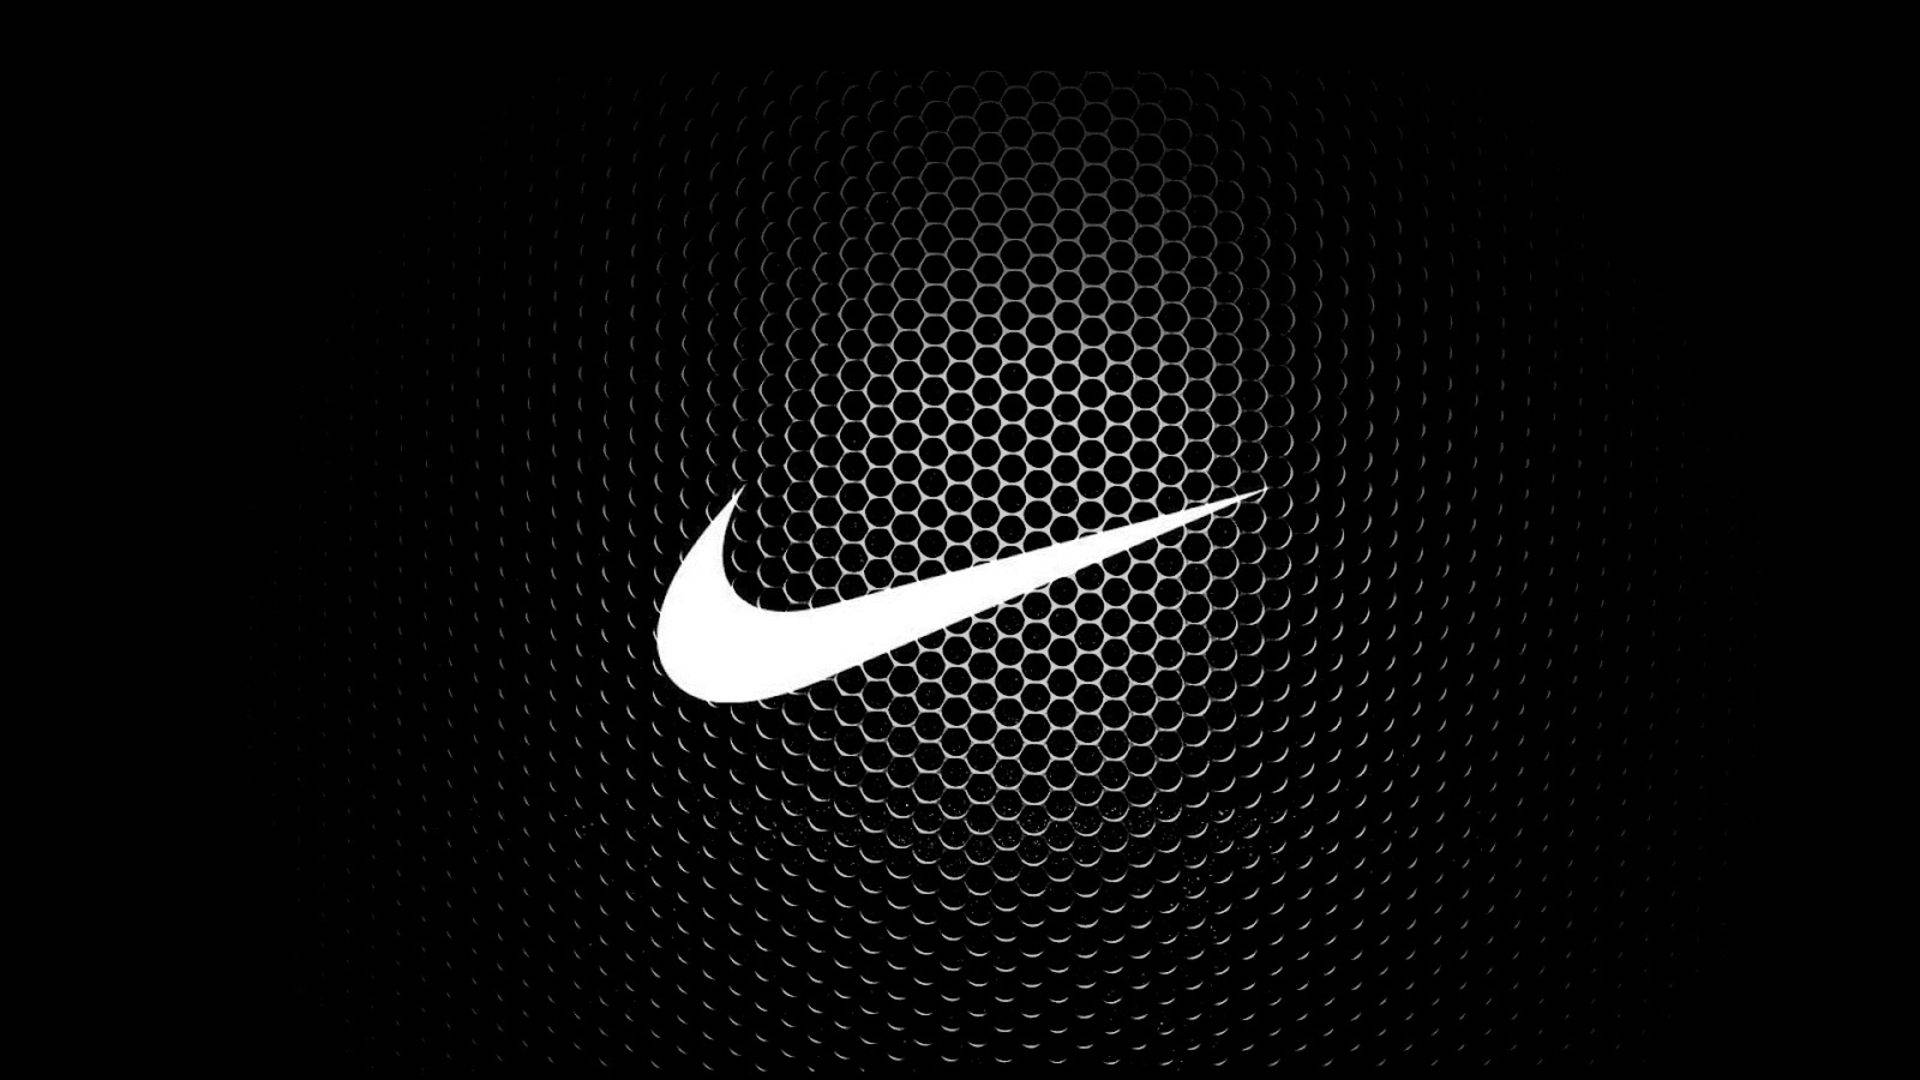 Nike Emblem With Cool Hexagon Pattern